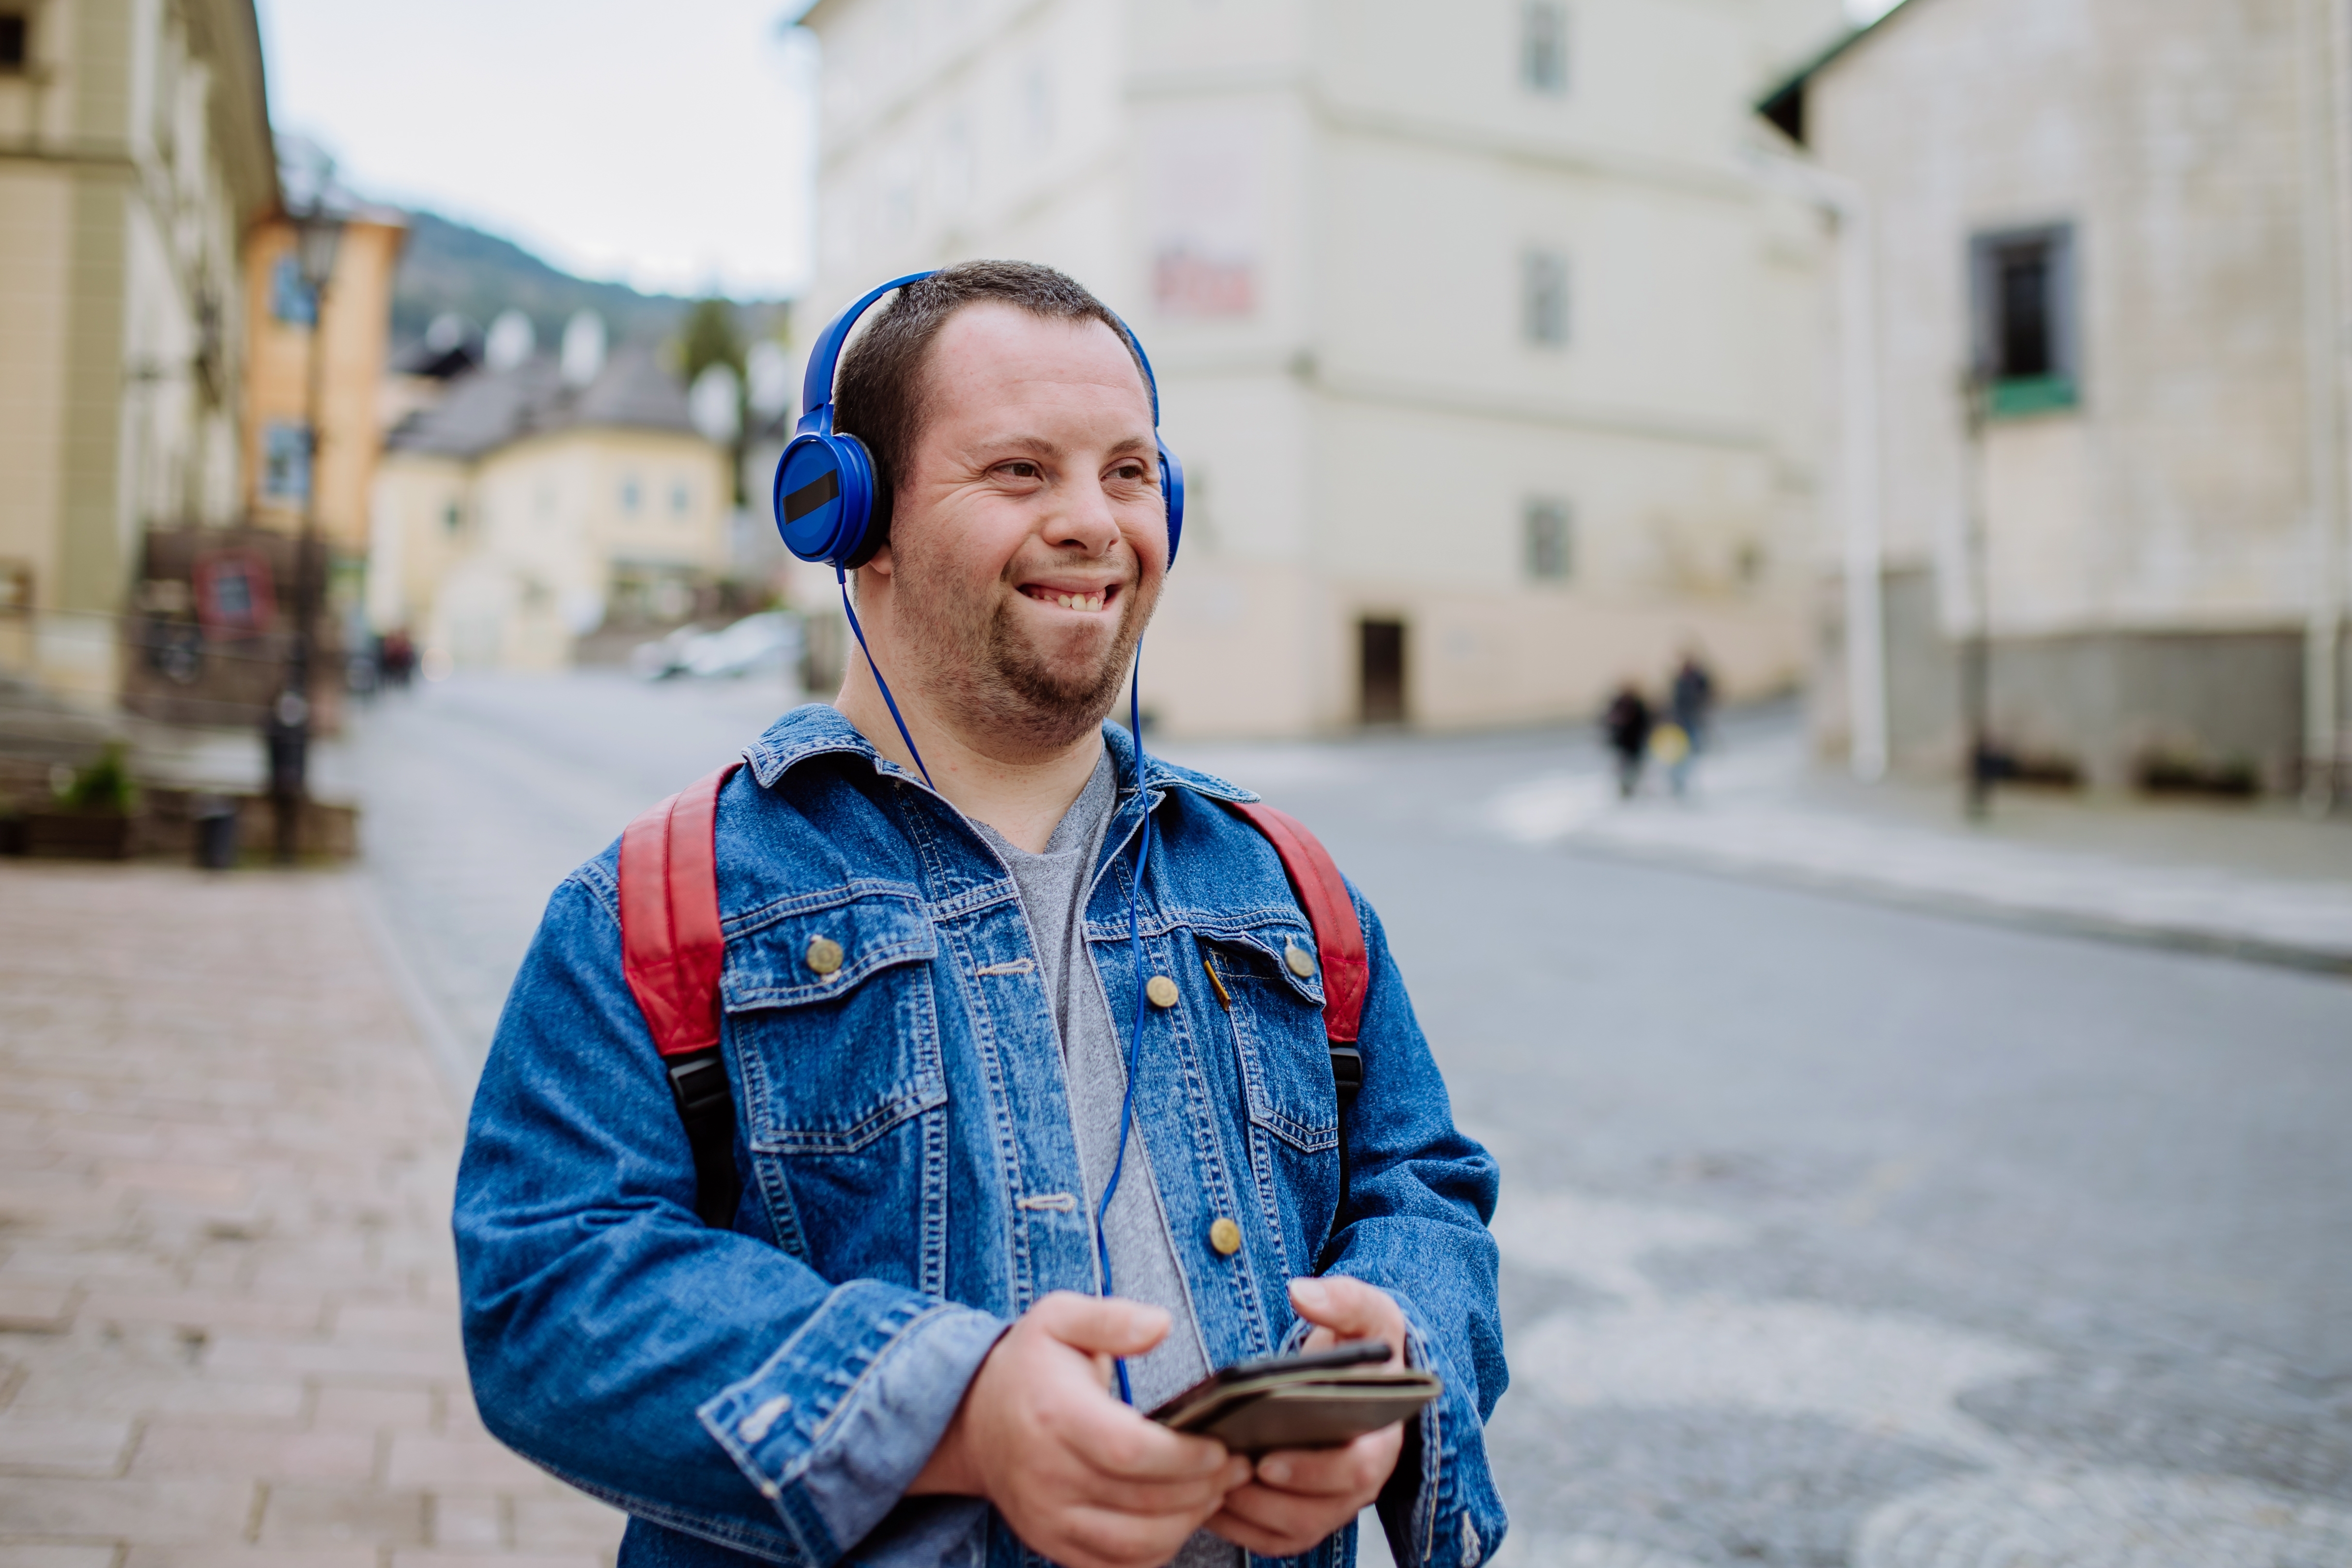 A man with Down sydrome listening to music while walking in street. | Source: Shutterstock